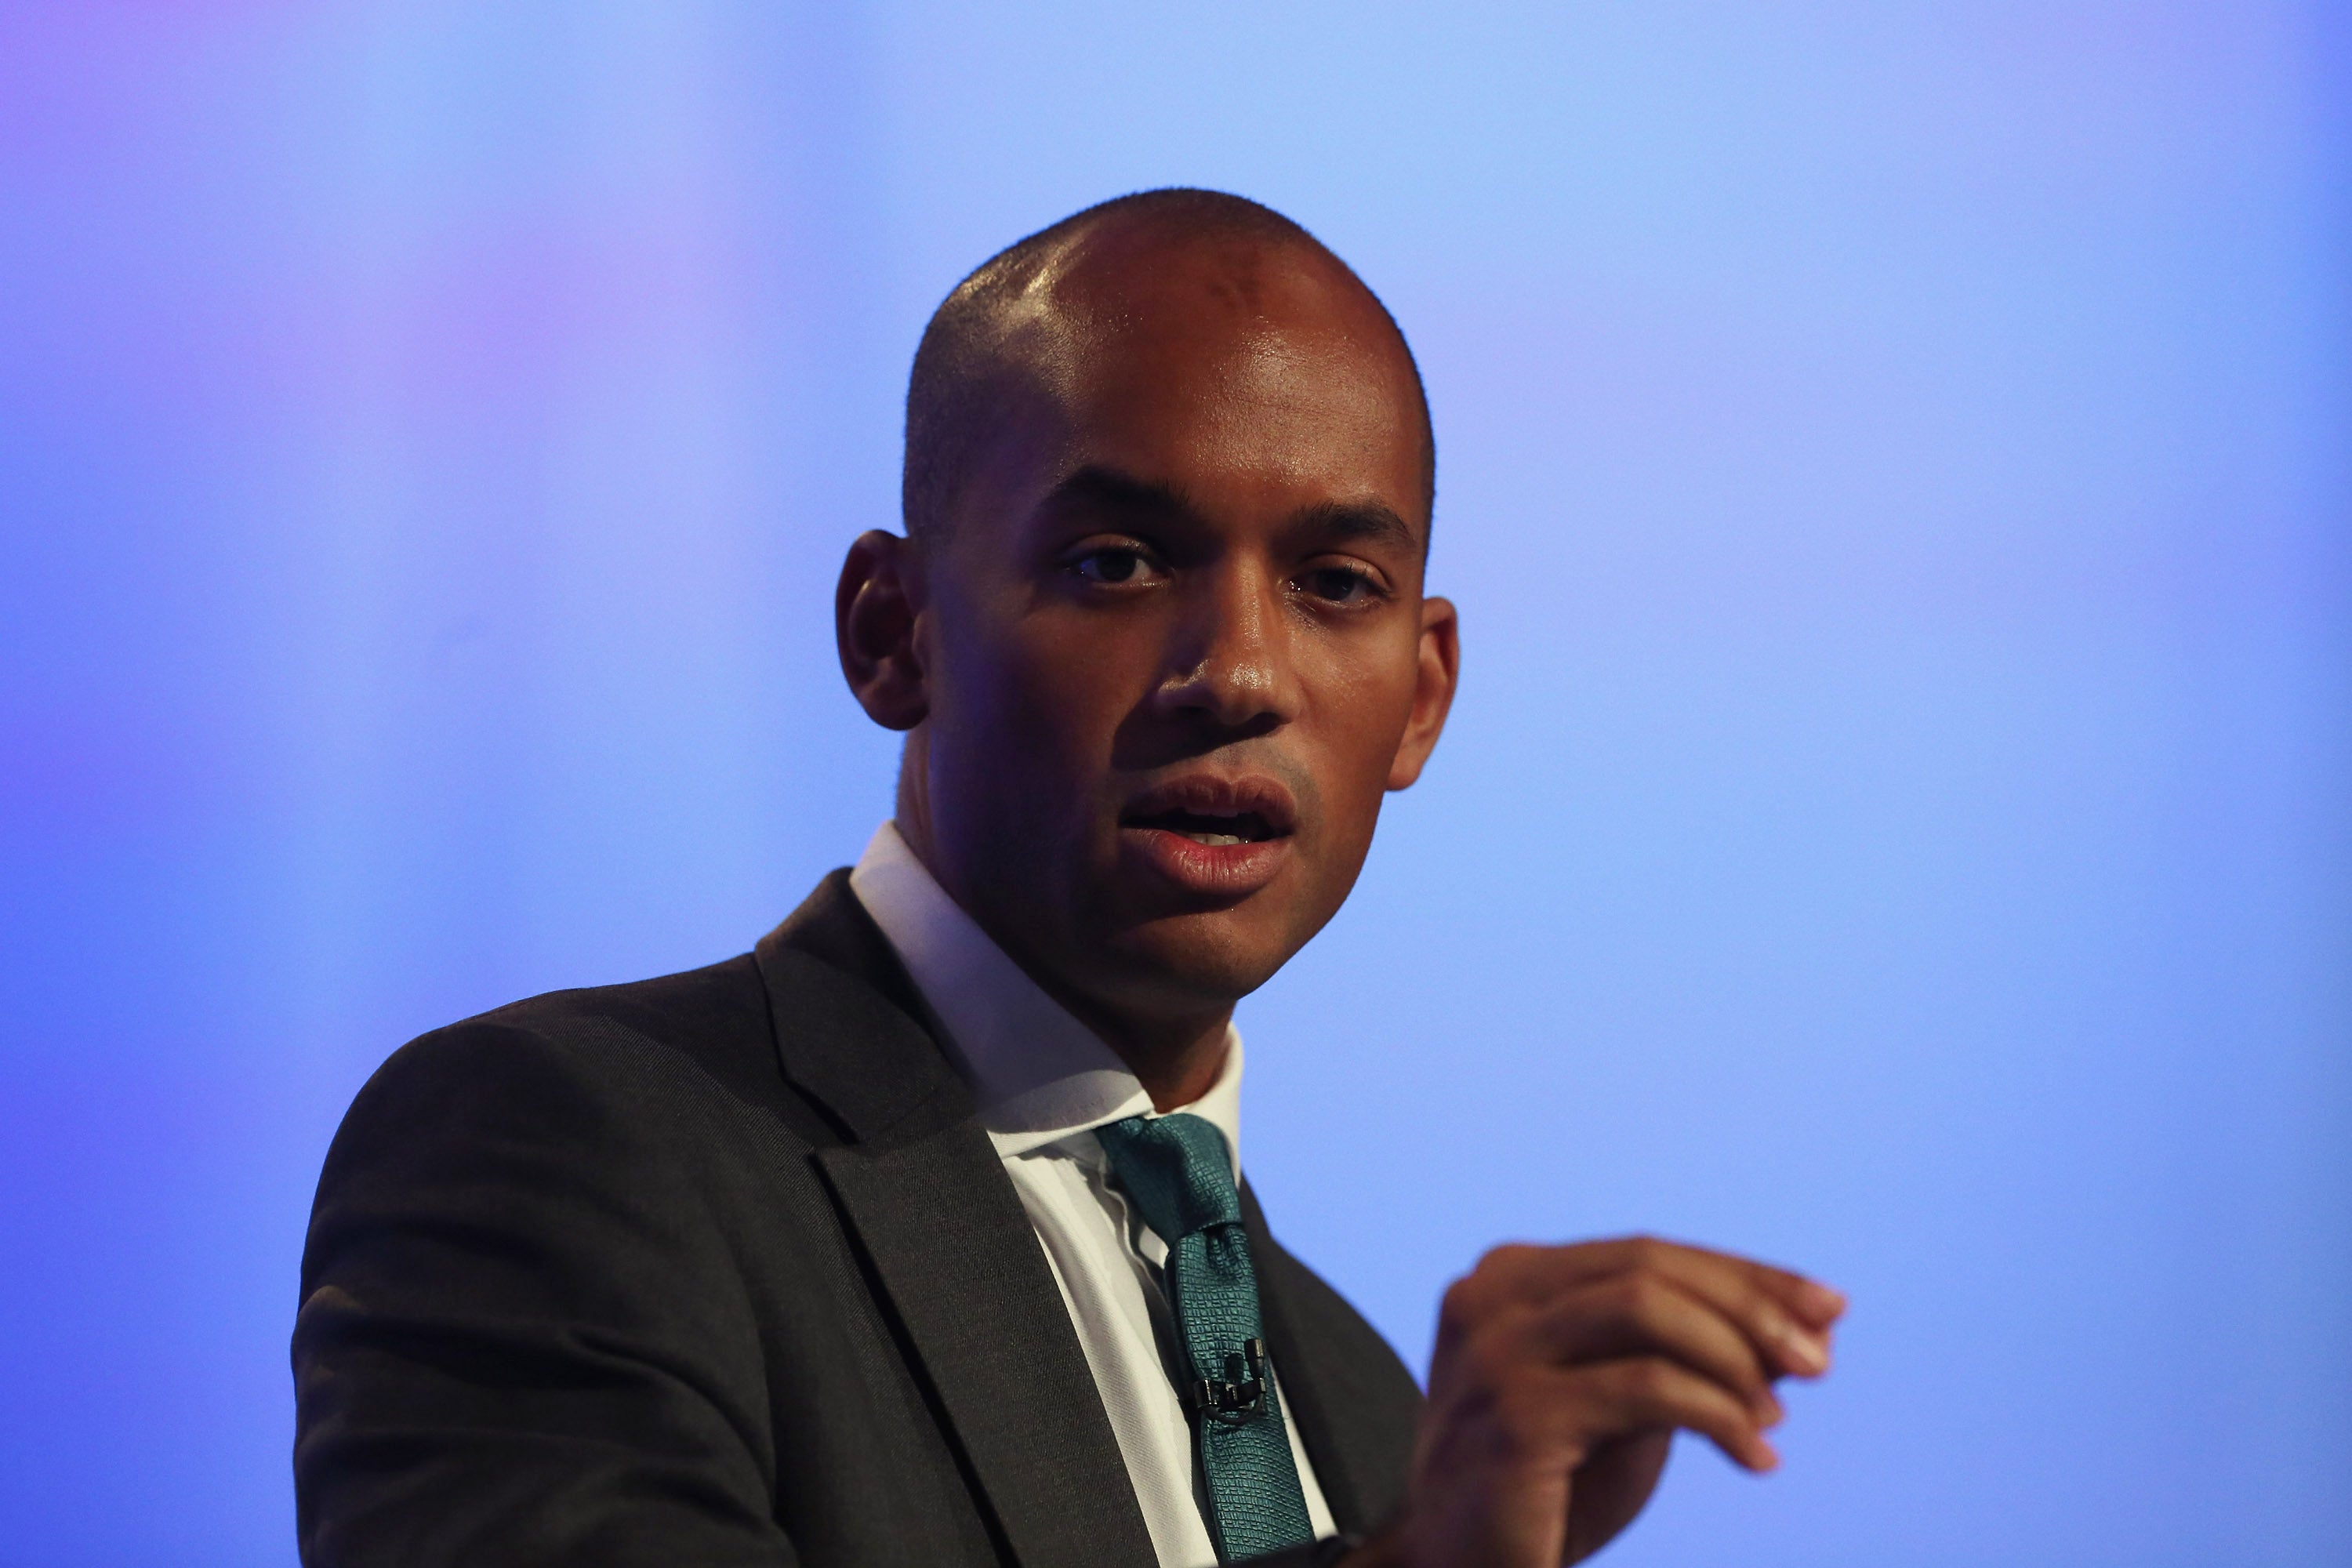 Ukip's Young Independence launches email campaign against Labour politician Chuka Umunna